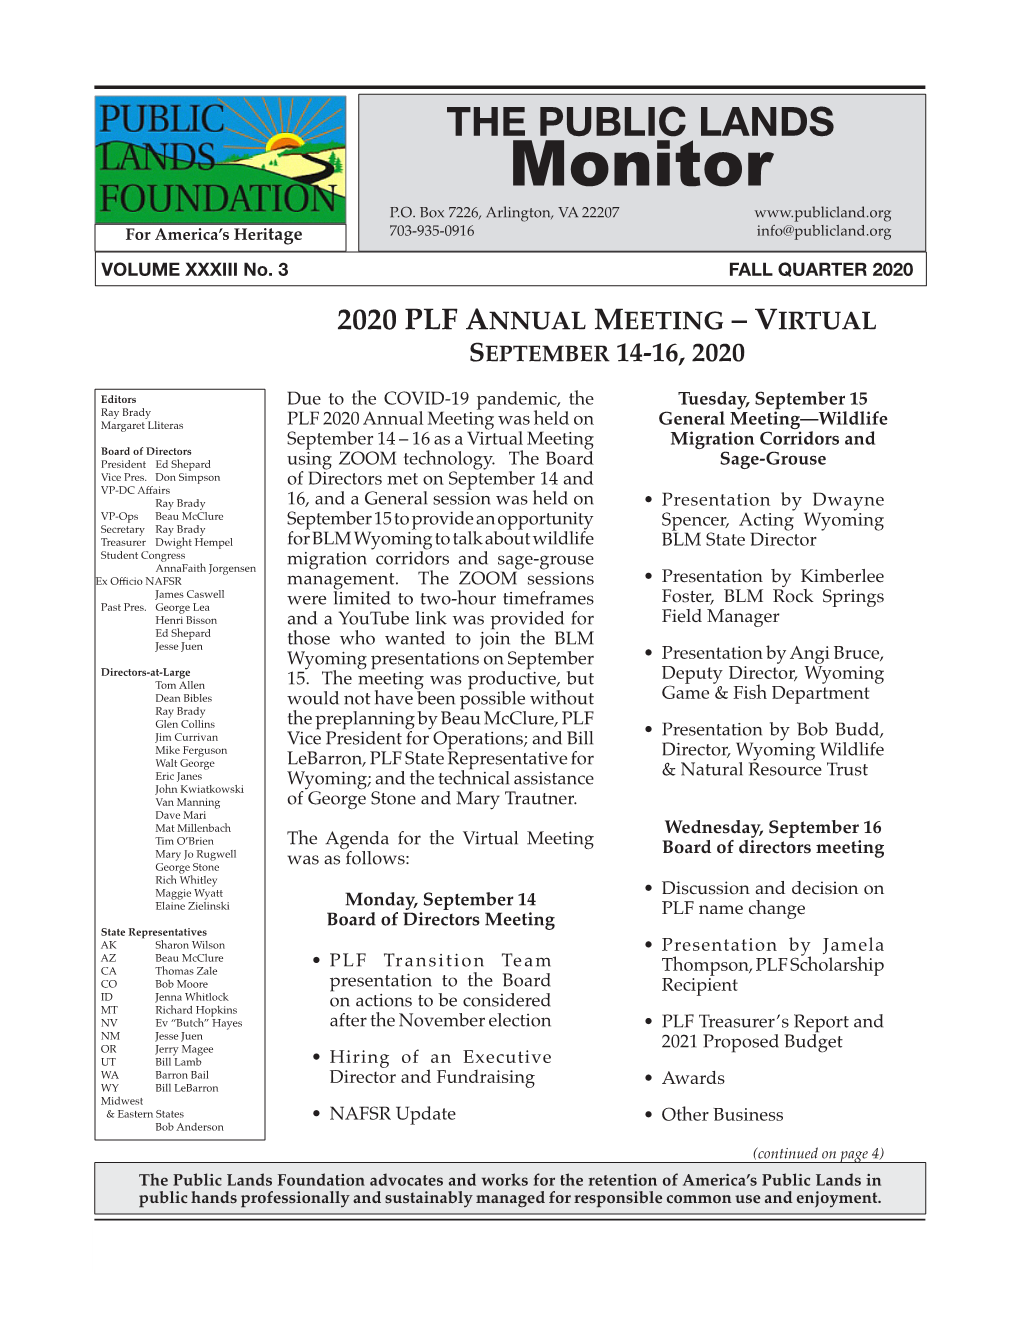 Read the Fall 2020 Monitor!